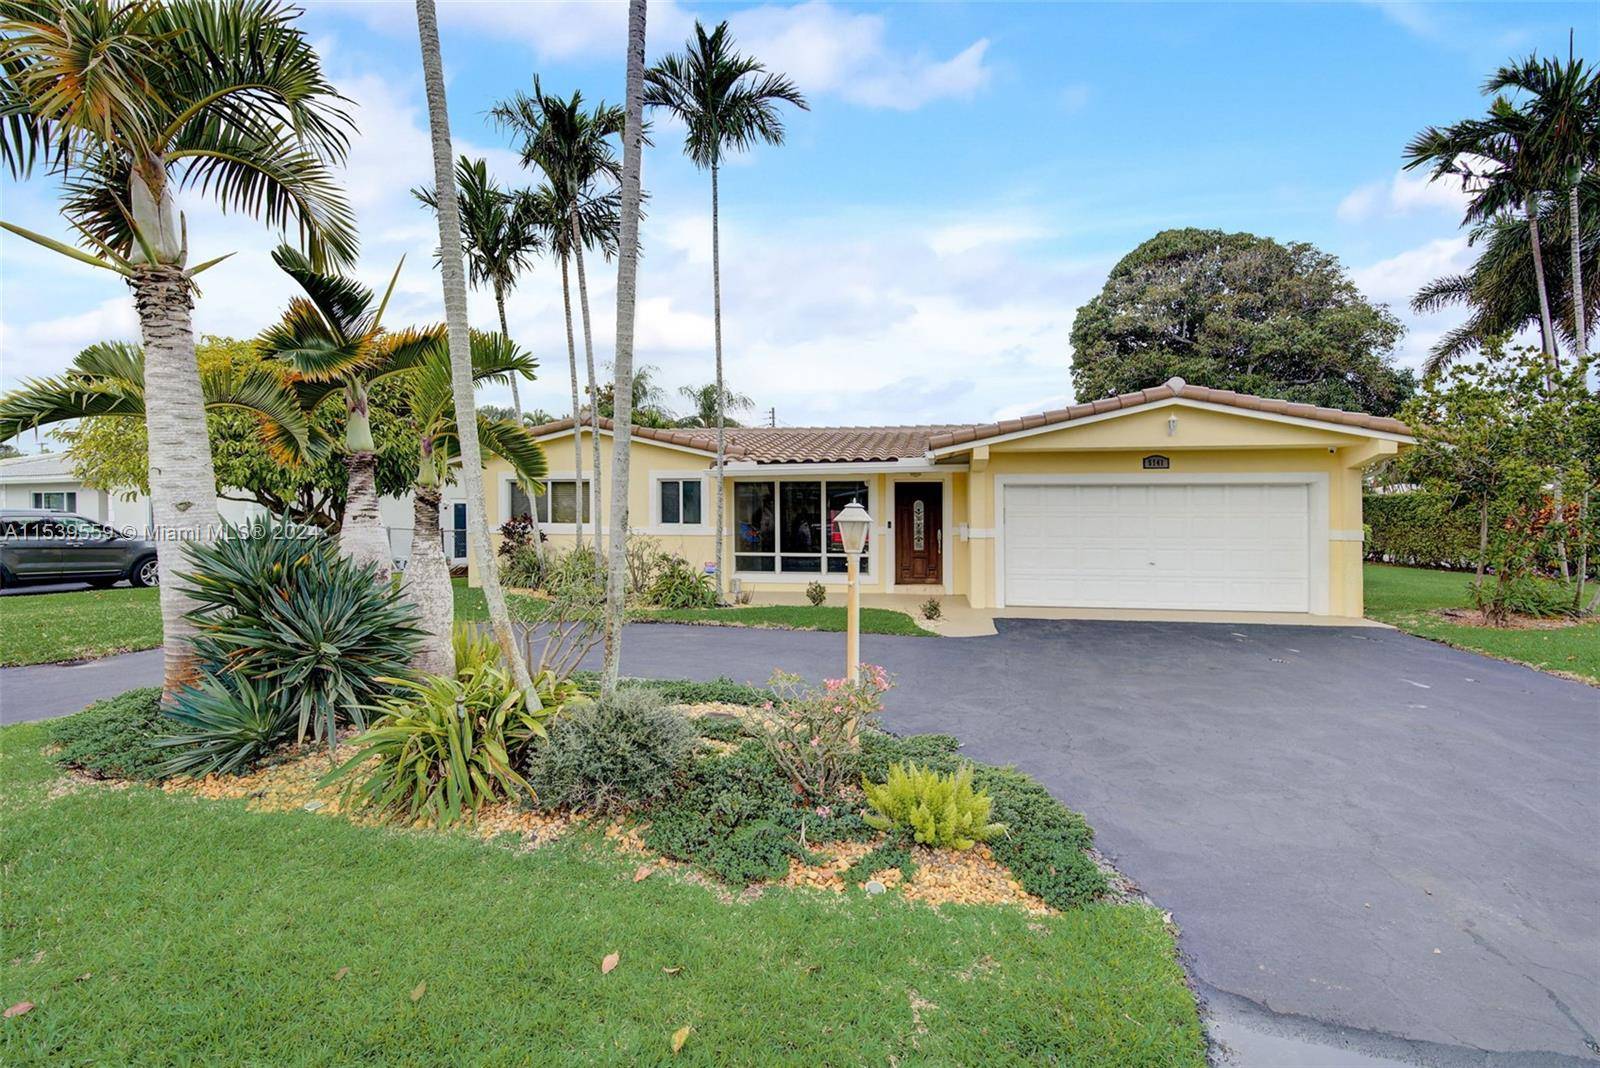 Welcome to your dream home, just moments from the sparking shore of Ft Lauderdale Beach.